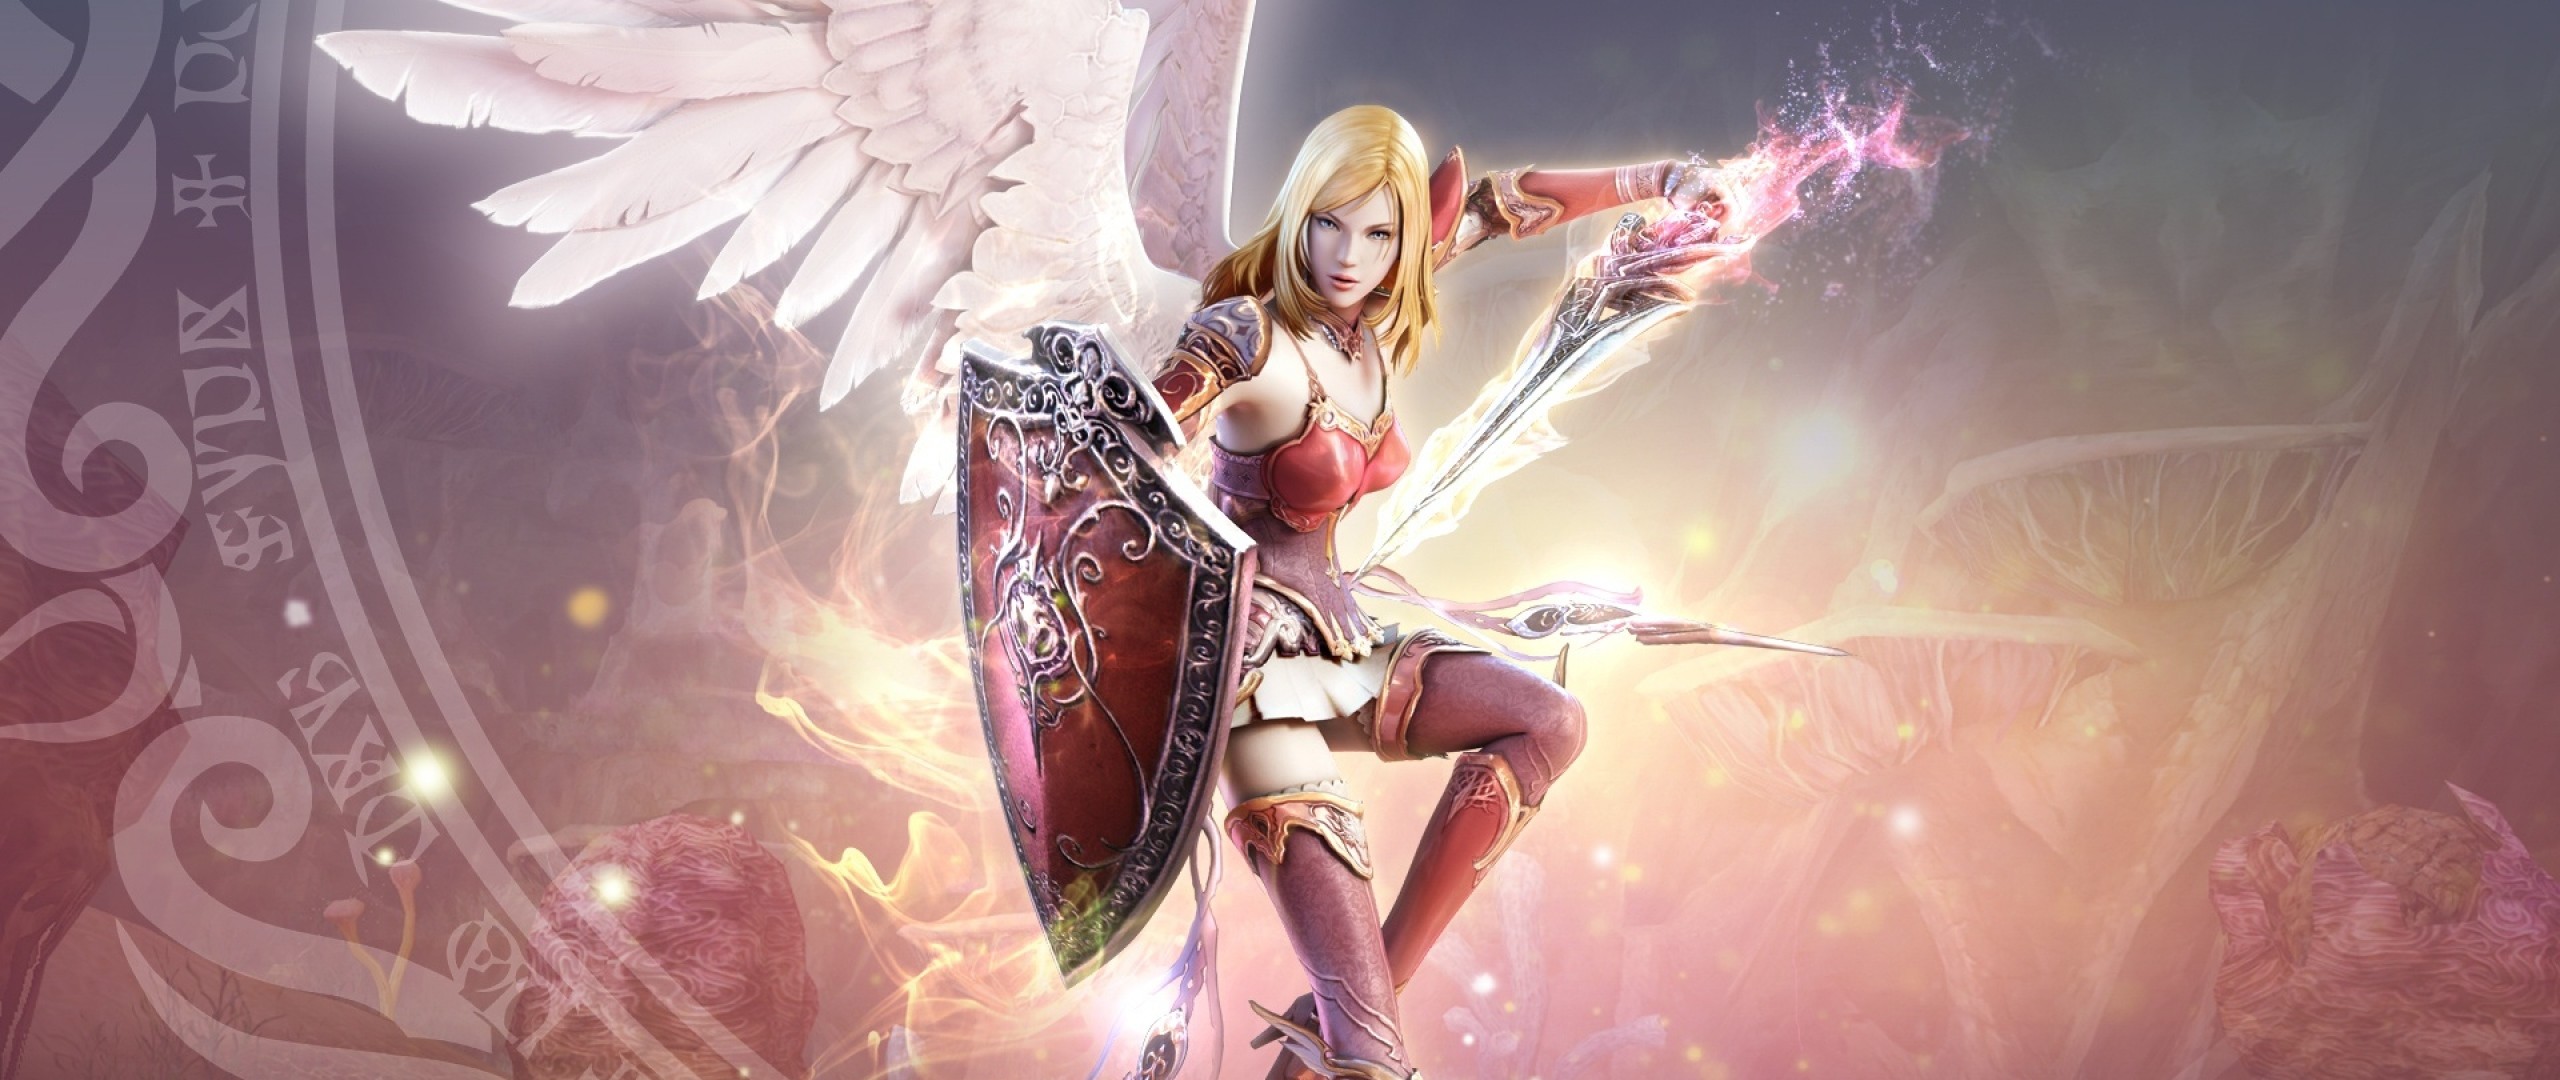 2560x1080  Wallpaper aion the tower of eternity, girl, bow, arrow, mountain